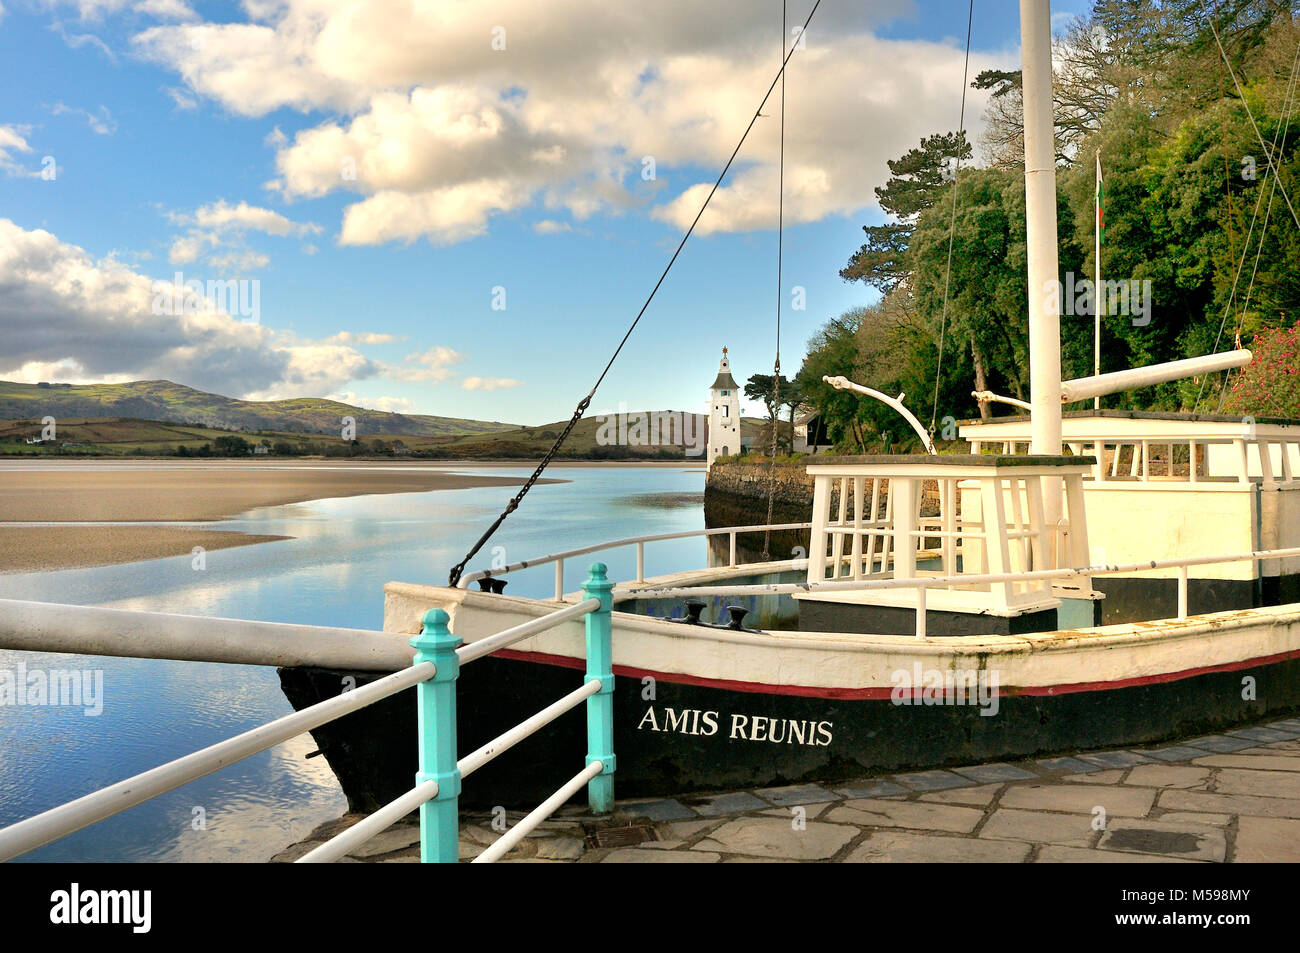 A view across the bay at Portmeirion, North Wales, showing the stone boat Stock Photo